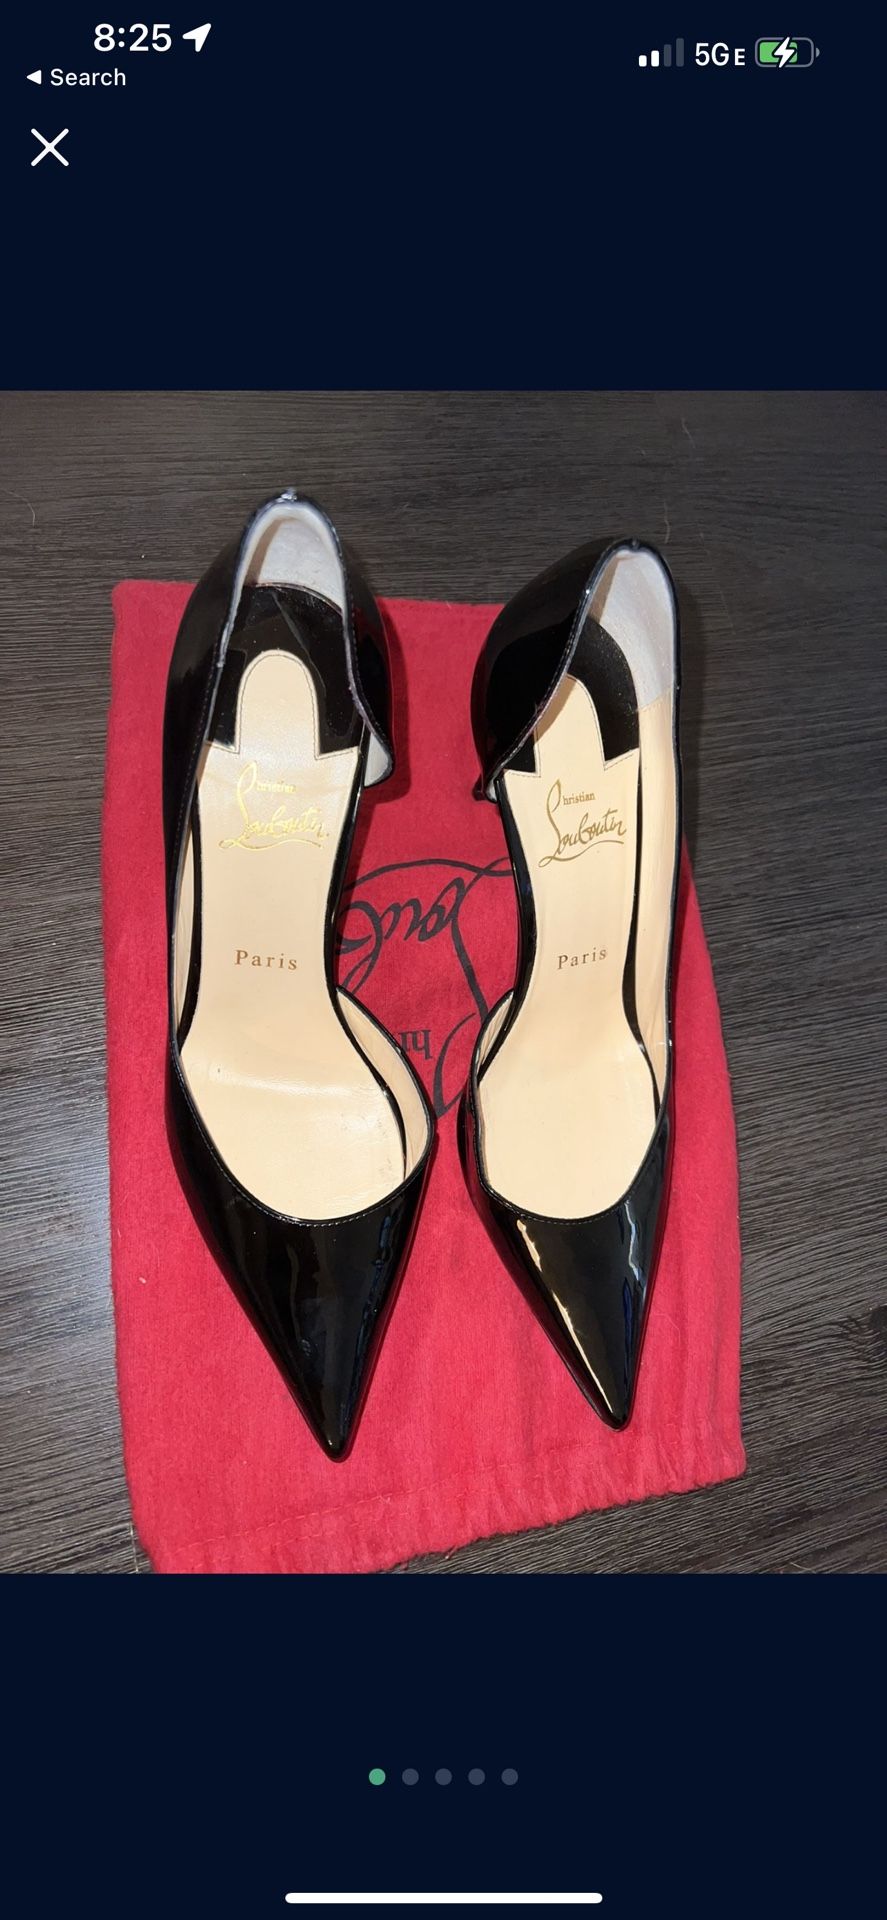 Red Bottoms - Christian Louboutin